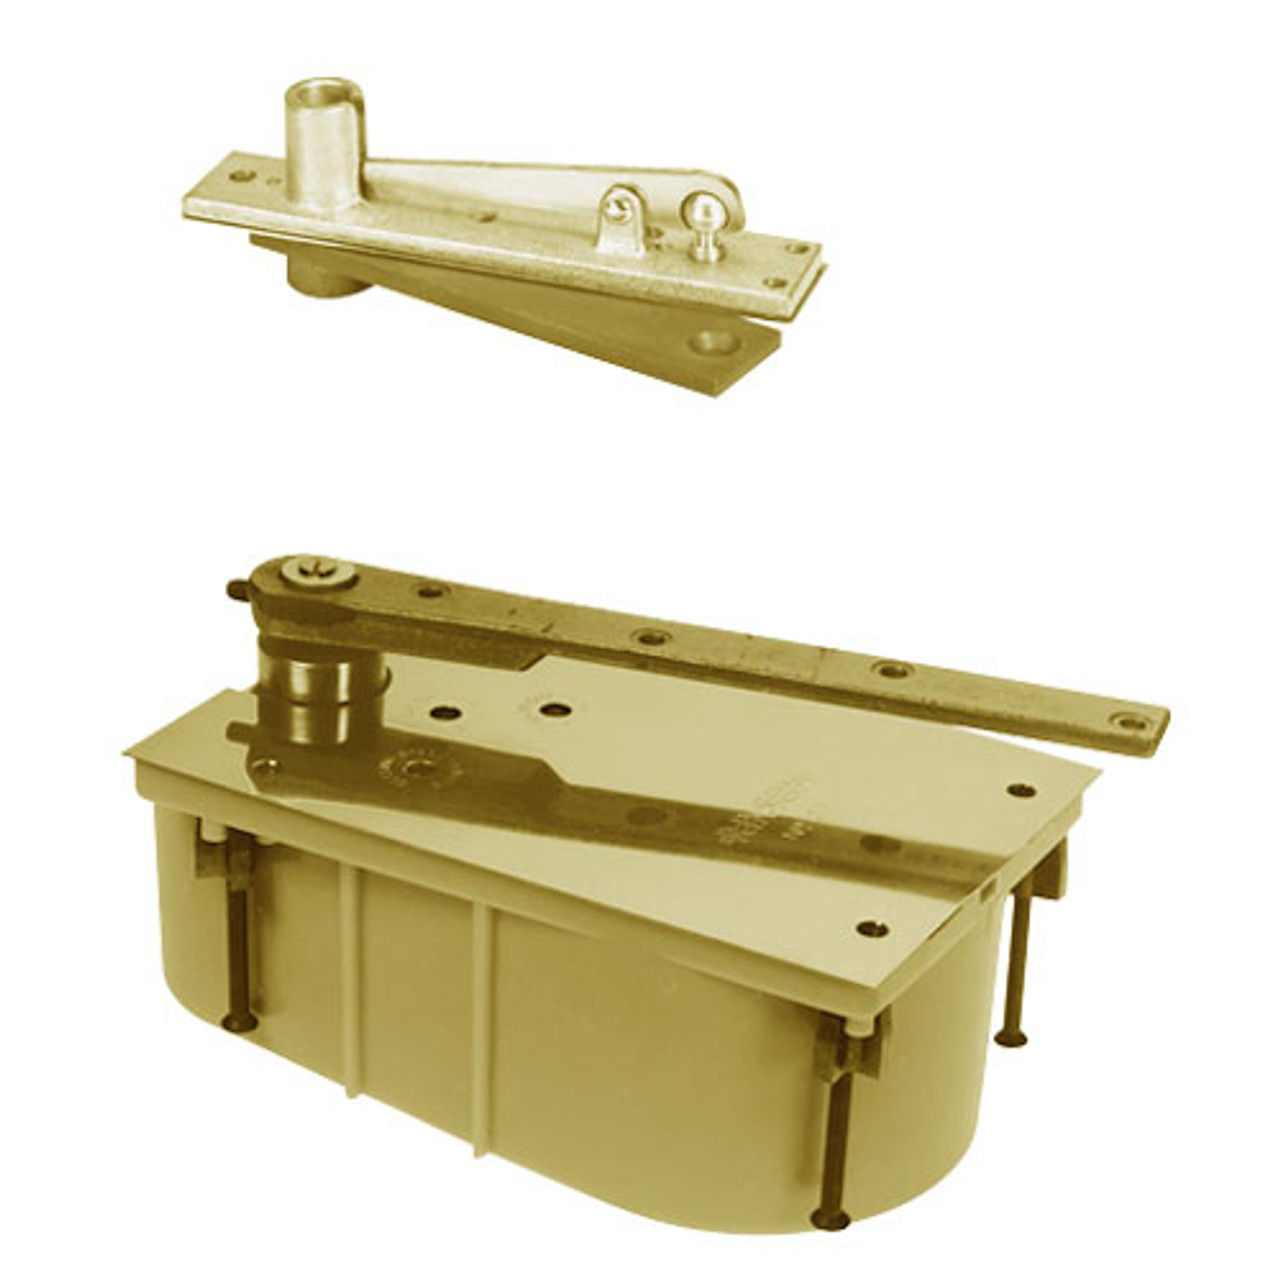 28-105S-554-LTP-RH-606 Rixson 28 Series Heavy Duty Single Acting Center Hung Floor Closer with Concealed Arm in Satin Brass Finish